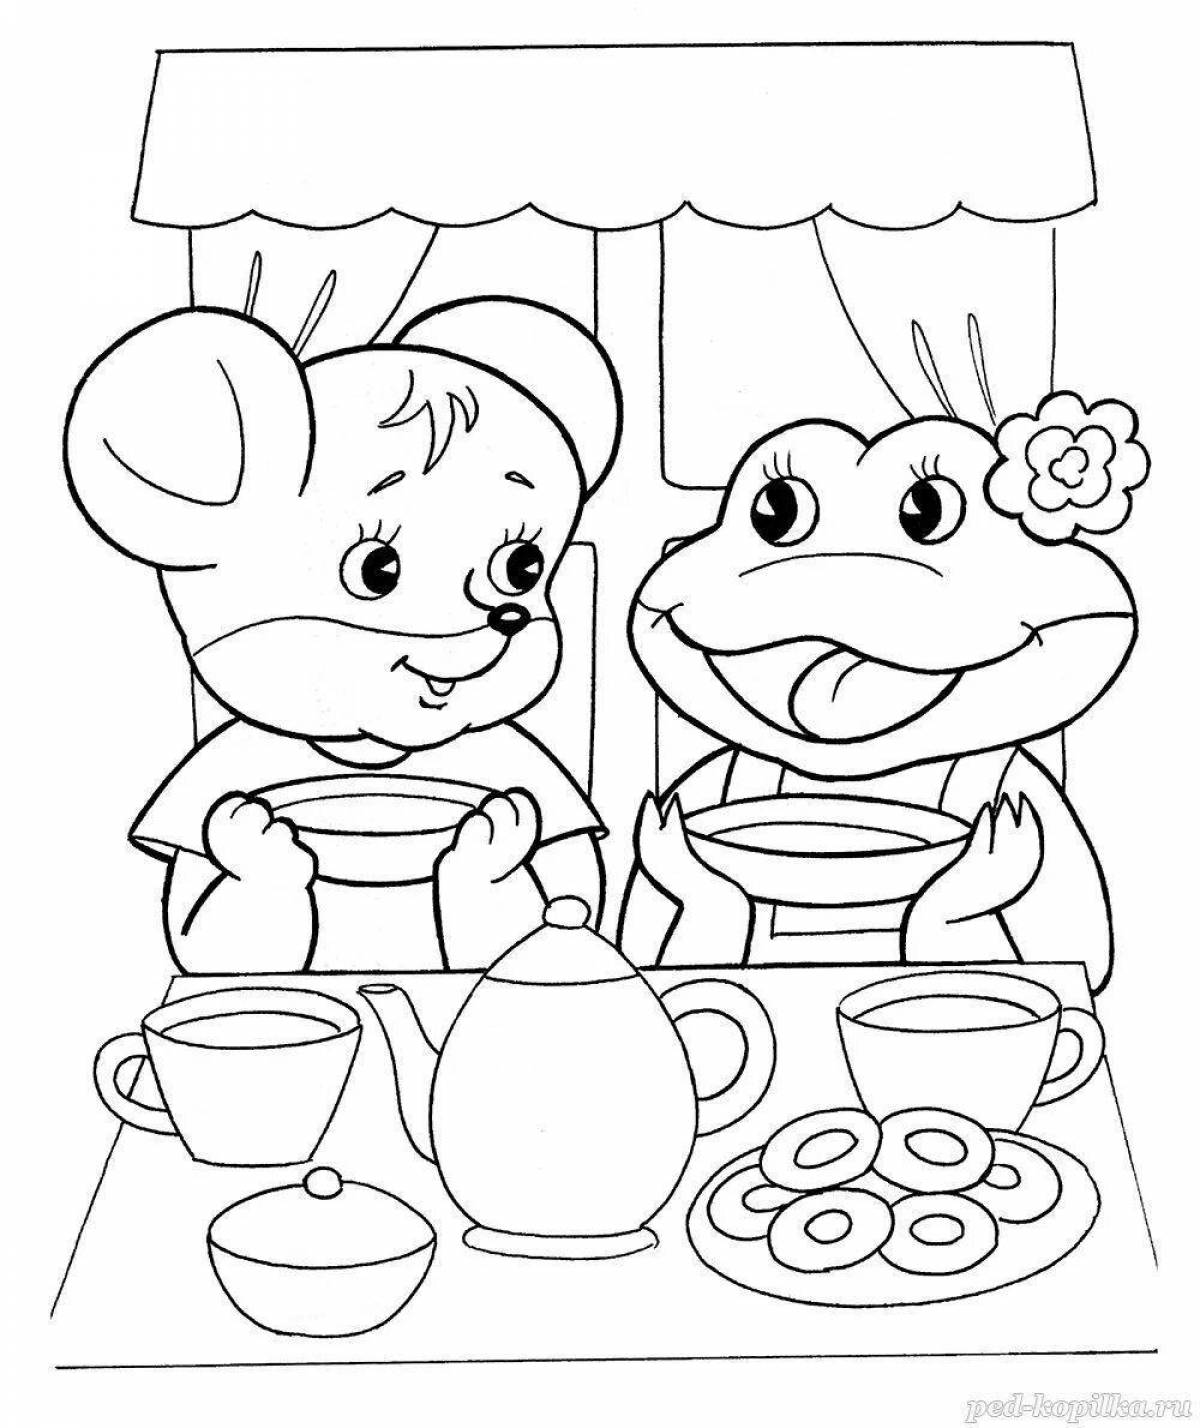 Teremok coloring pages for kids